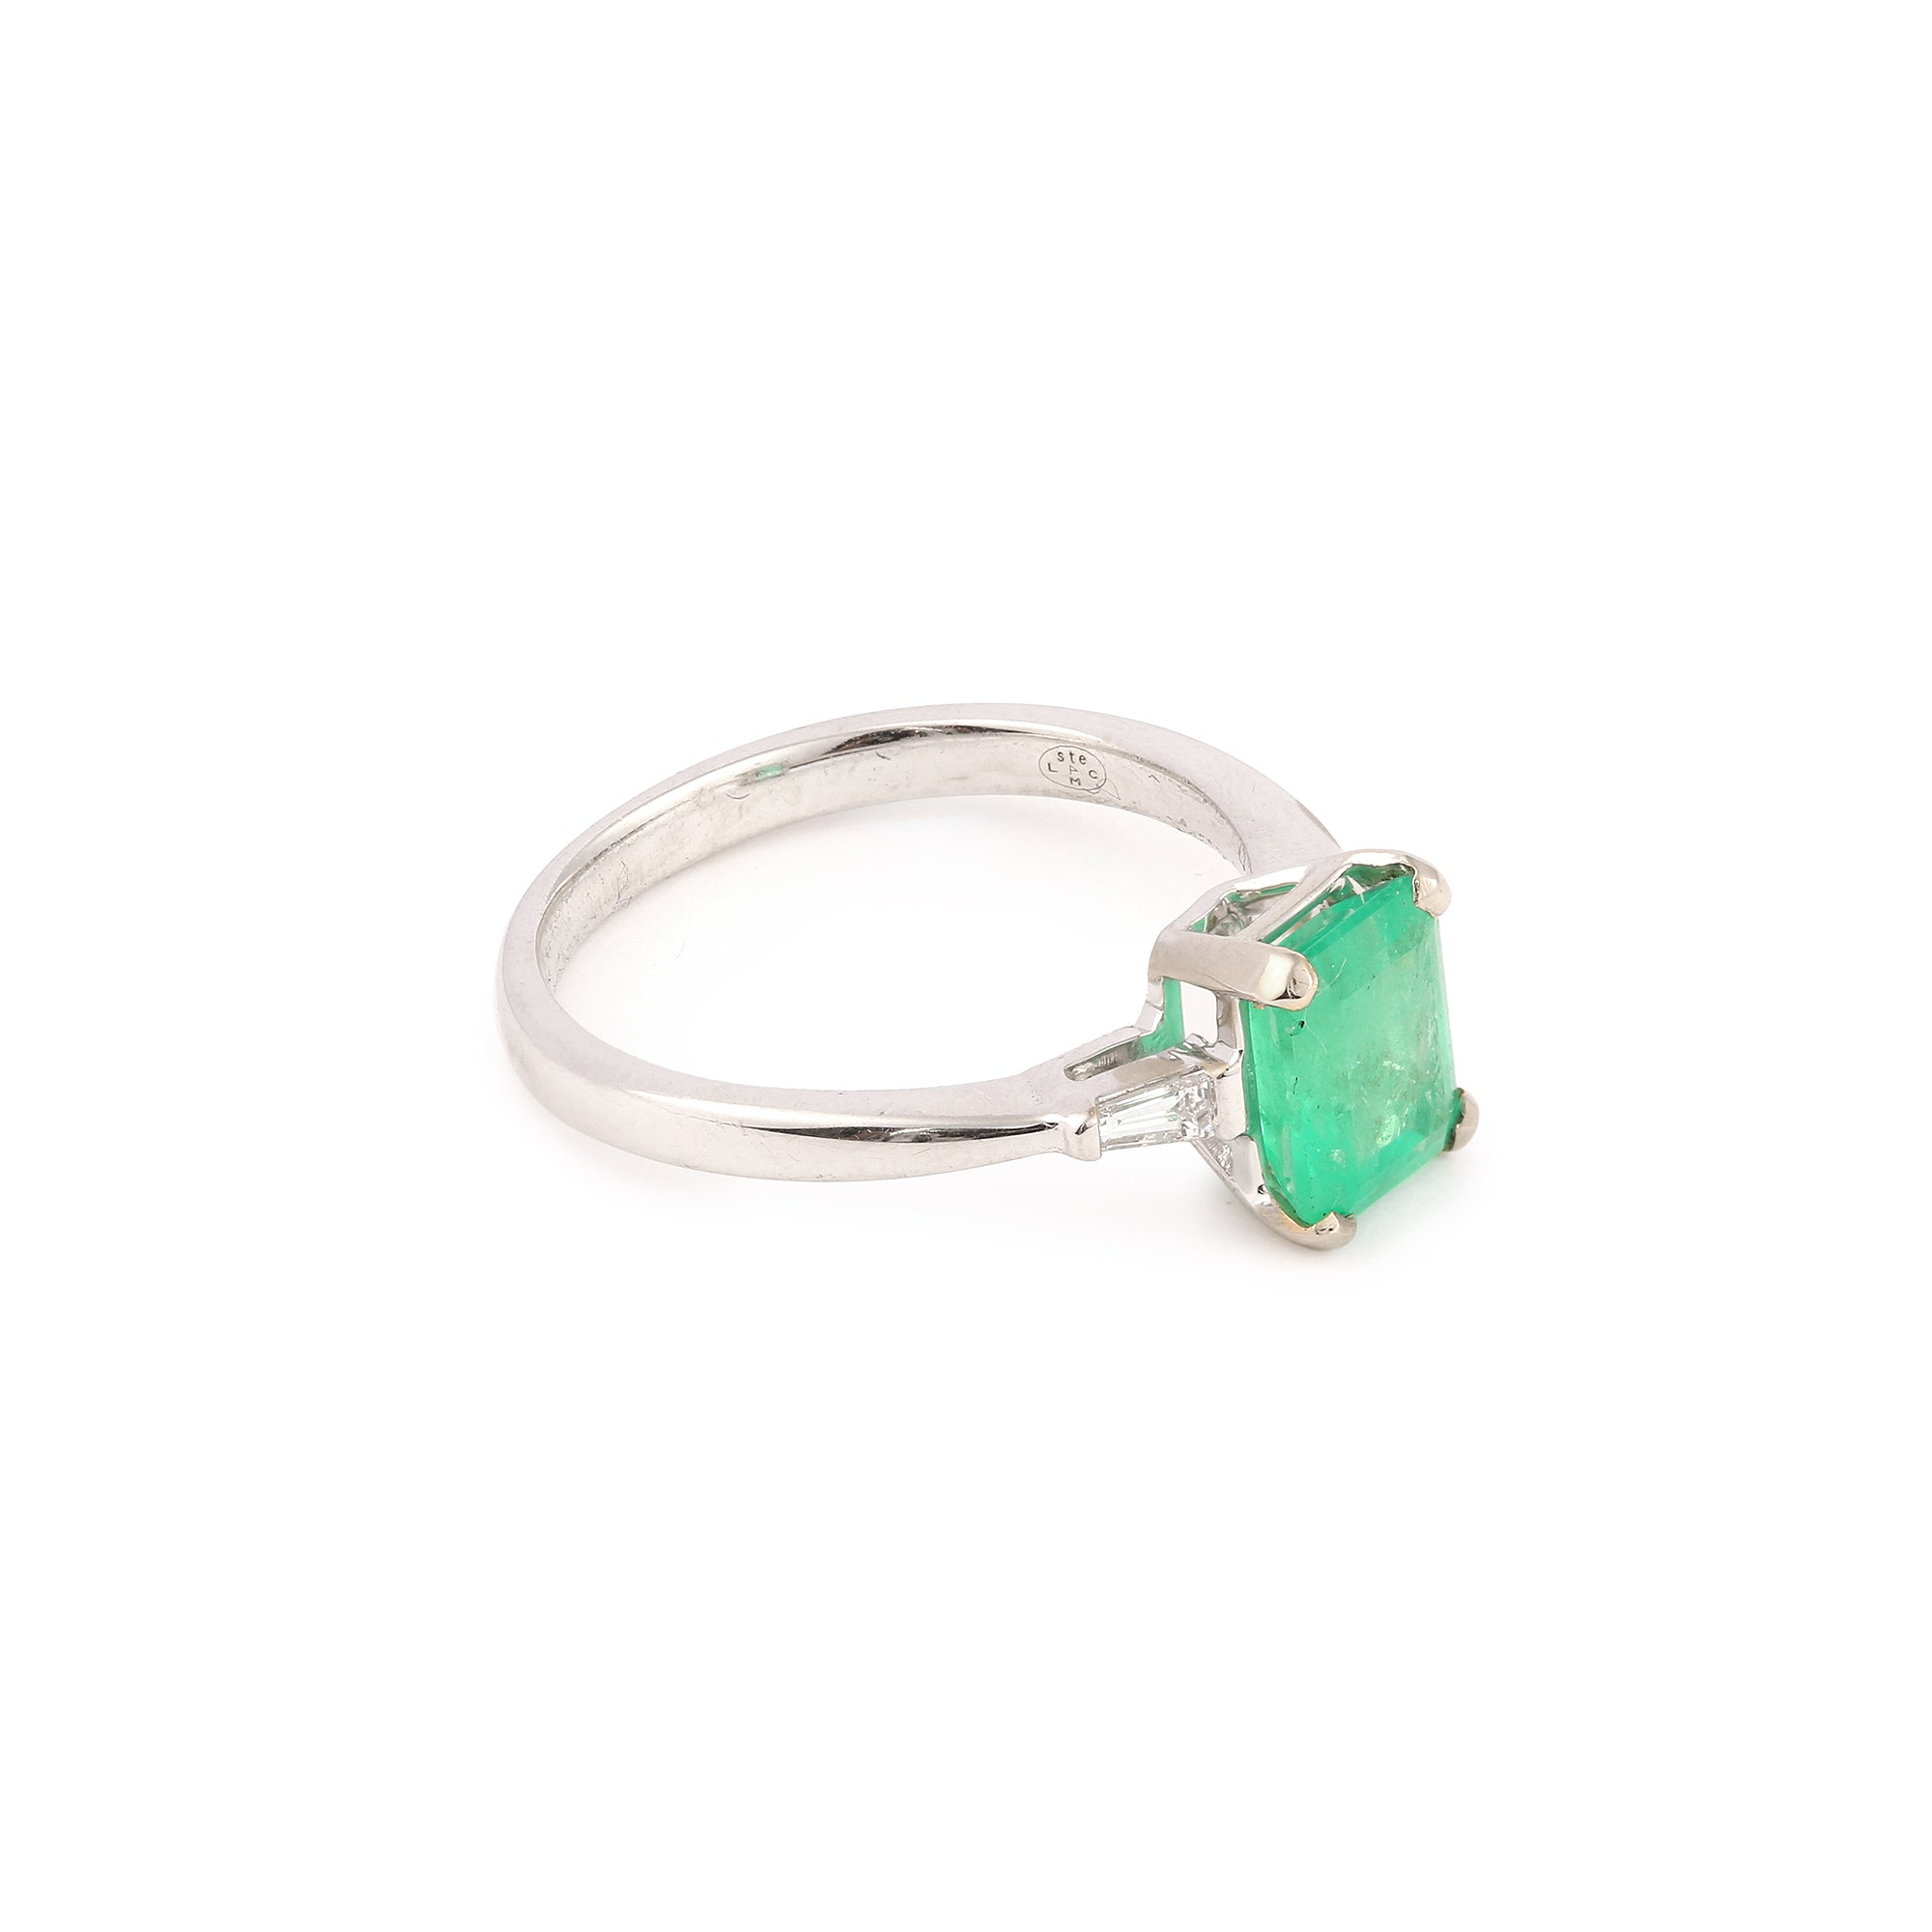 1.43 Carats Colombian Emerald Diamonds 18 Carats White Gold Ring